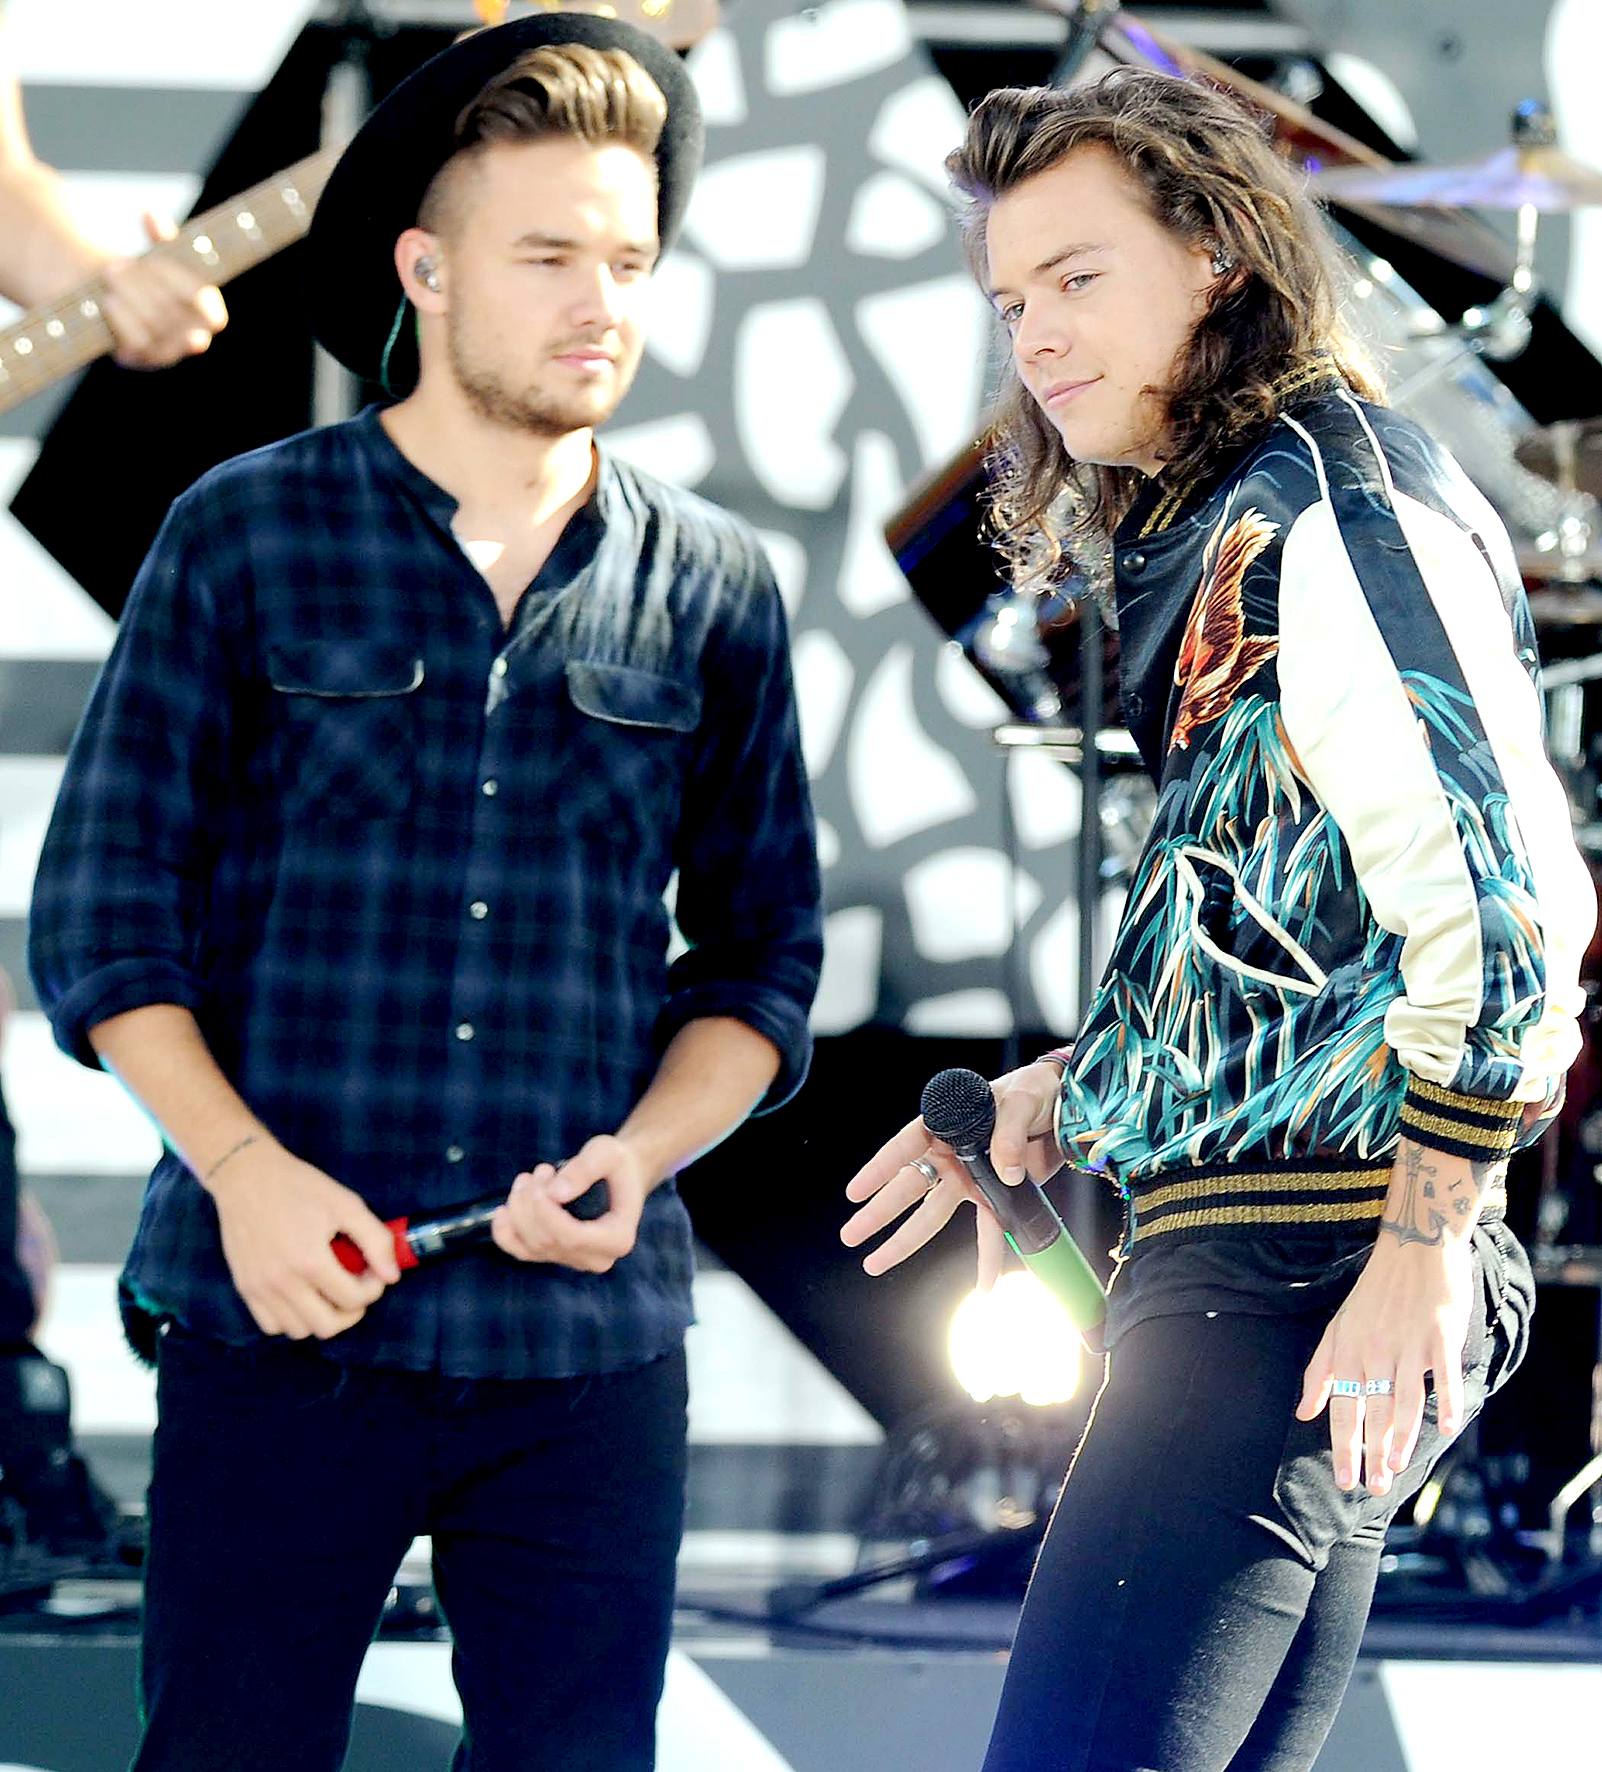 Liam Payne on Harry Styles’ Solo Music ‘Not Something I’d Listen To’